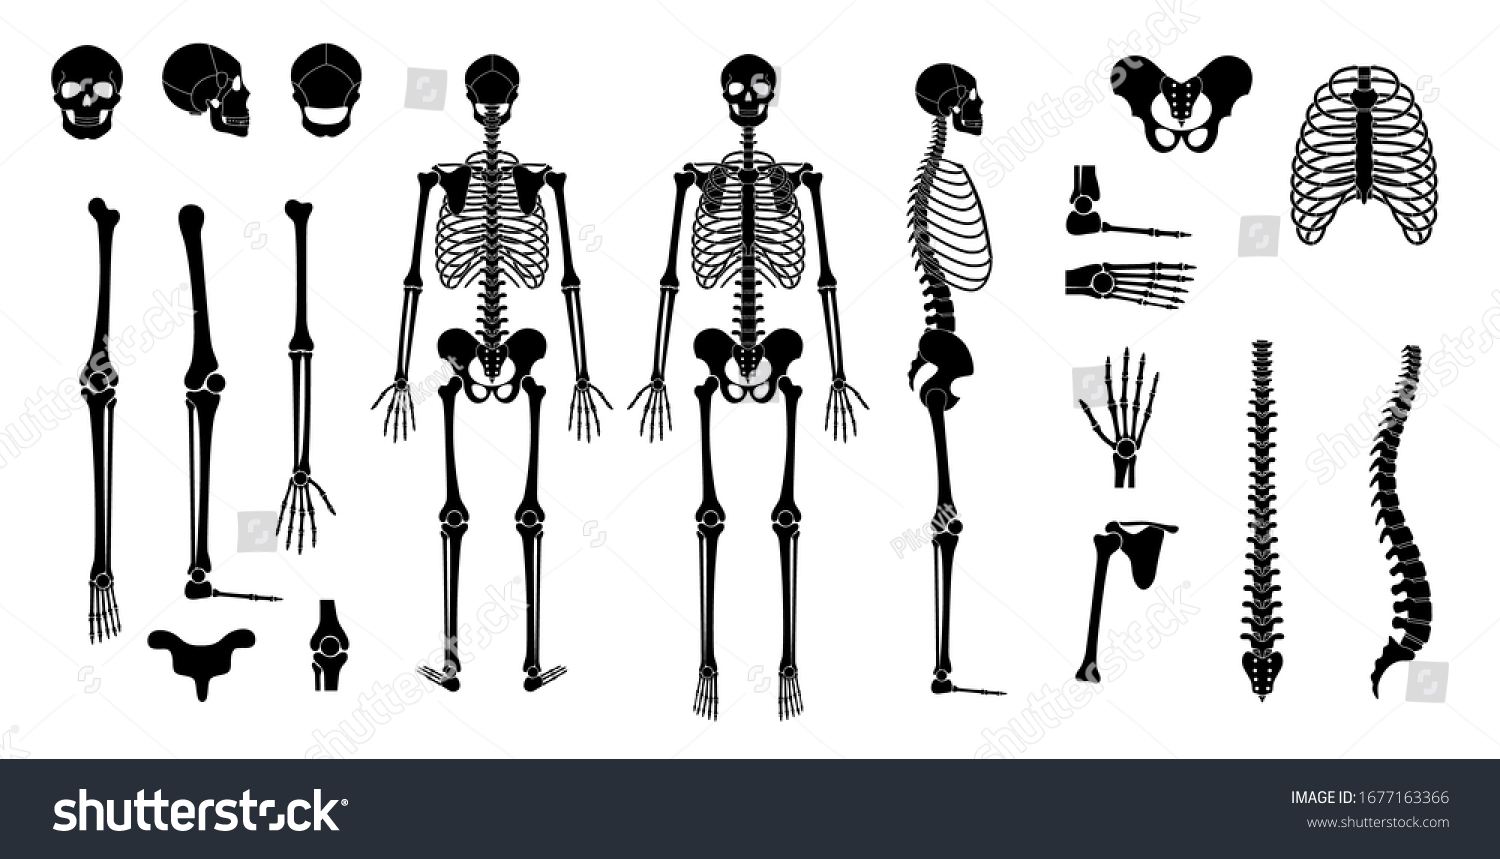 Human man skeleton anatomy in front, profile and back view. Vector isolated flat illustration of skull and bones. Halloween, medical, educational or science banner
 #1677163366